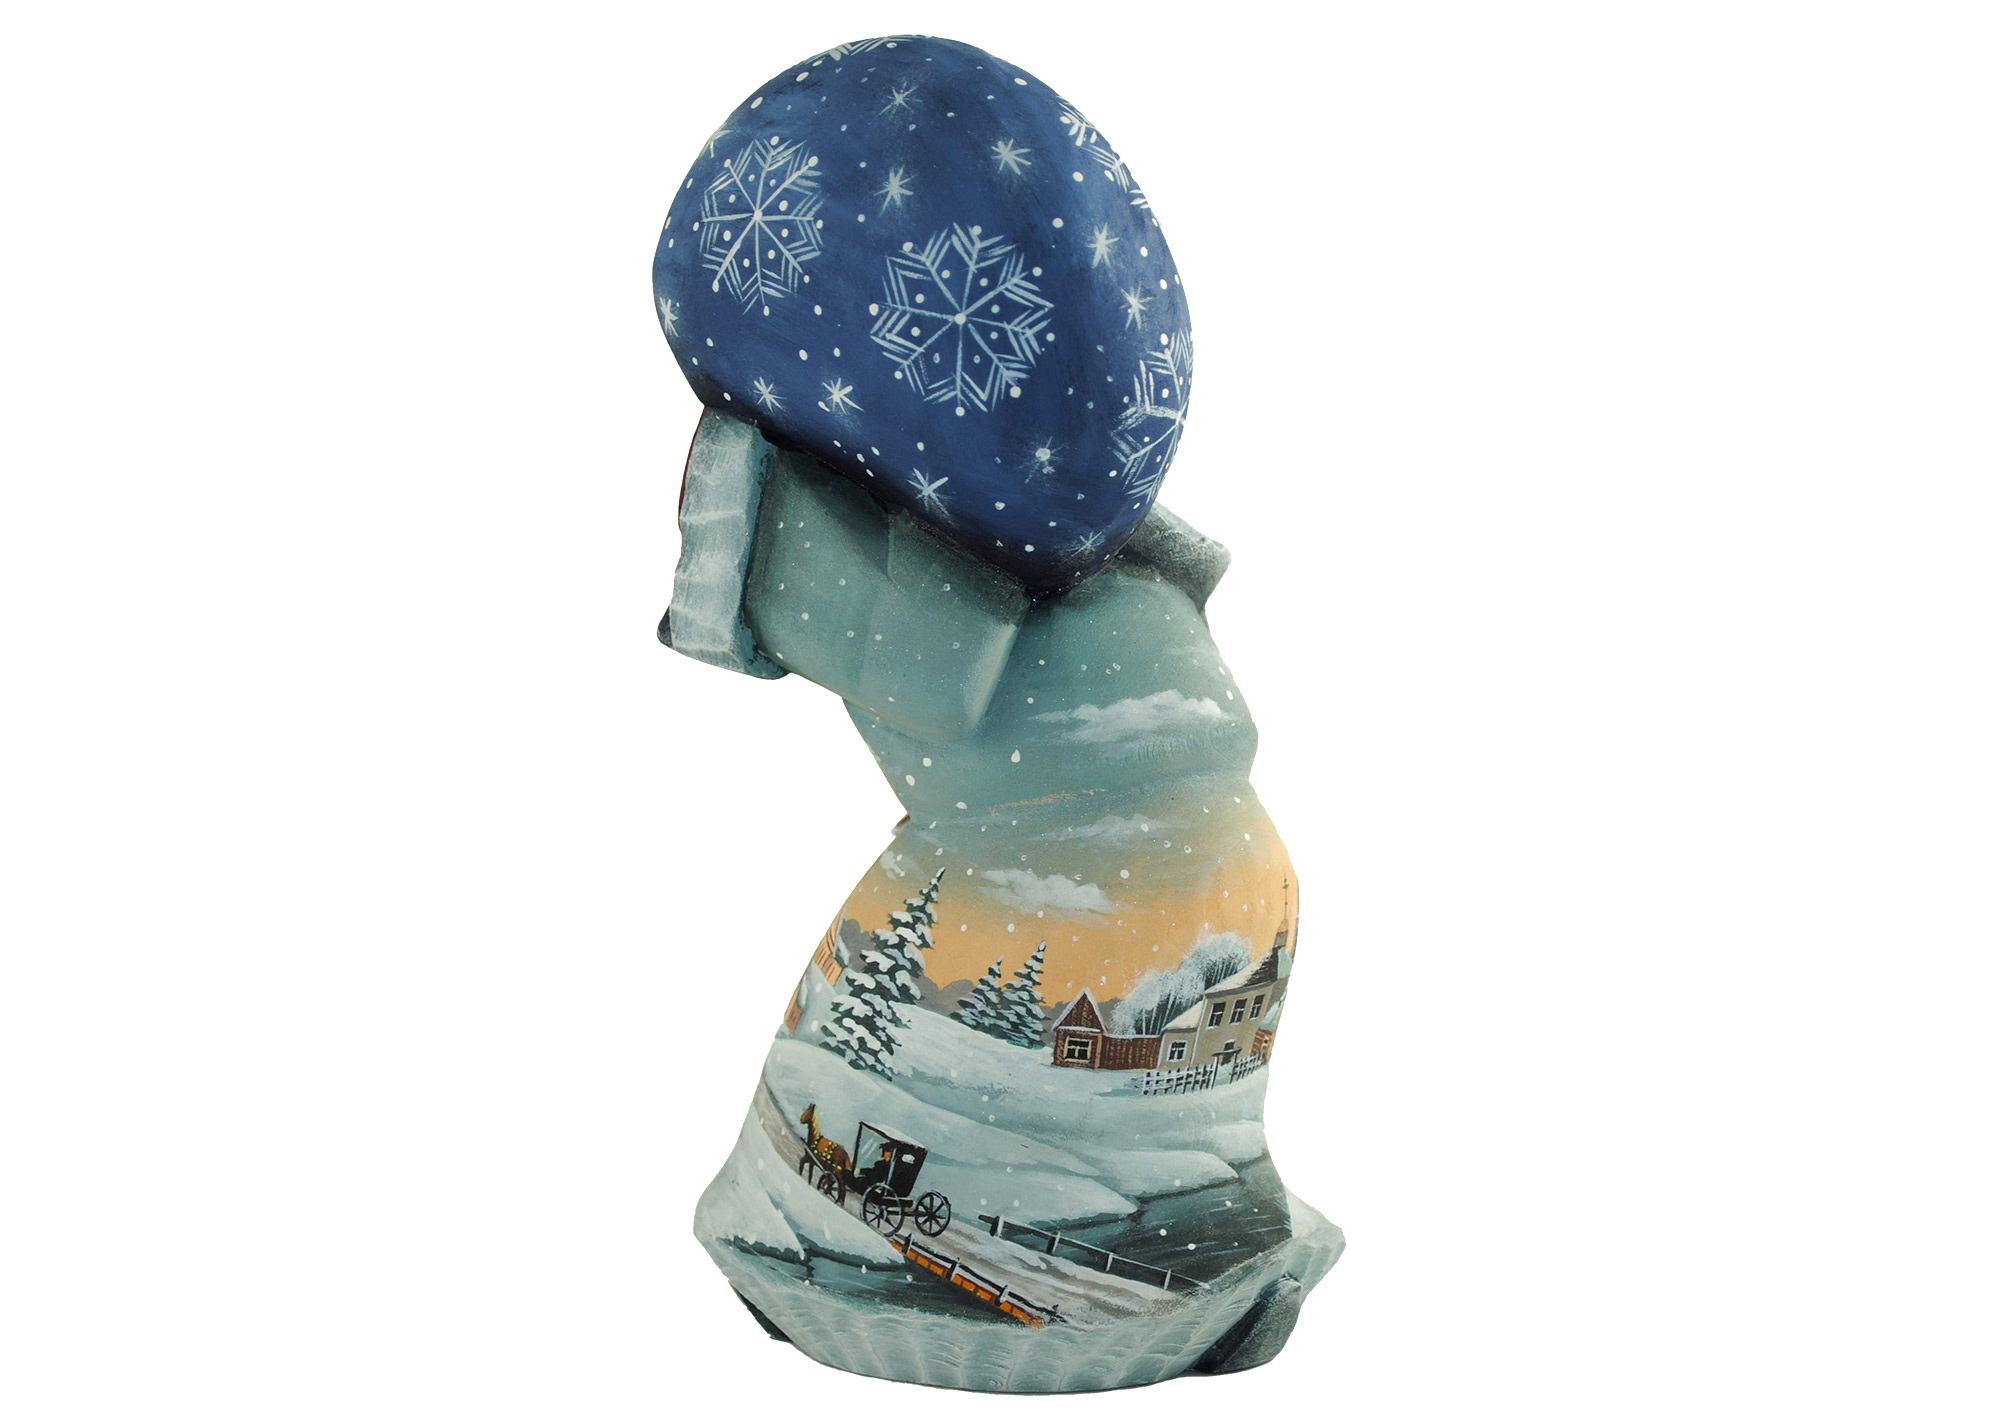 Buy Peaceful Village Father Frost Carving at GoldenCockerel.com